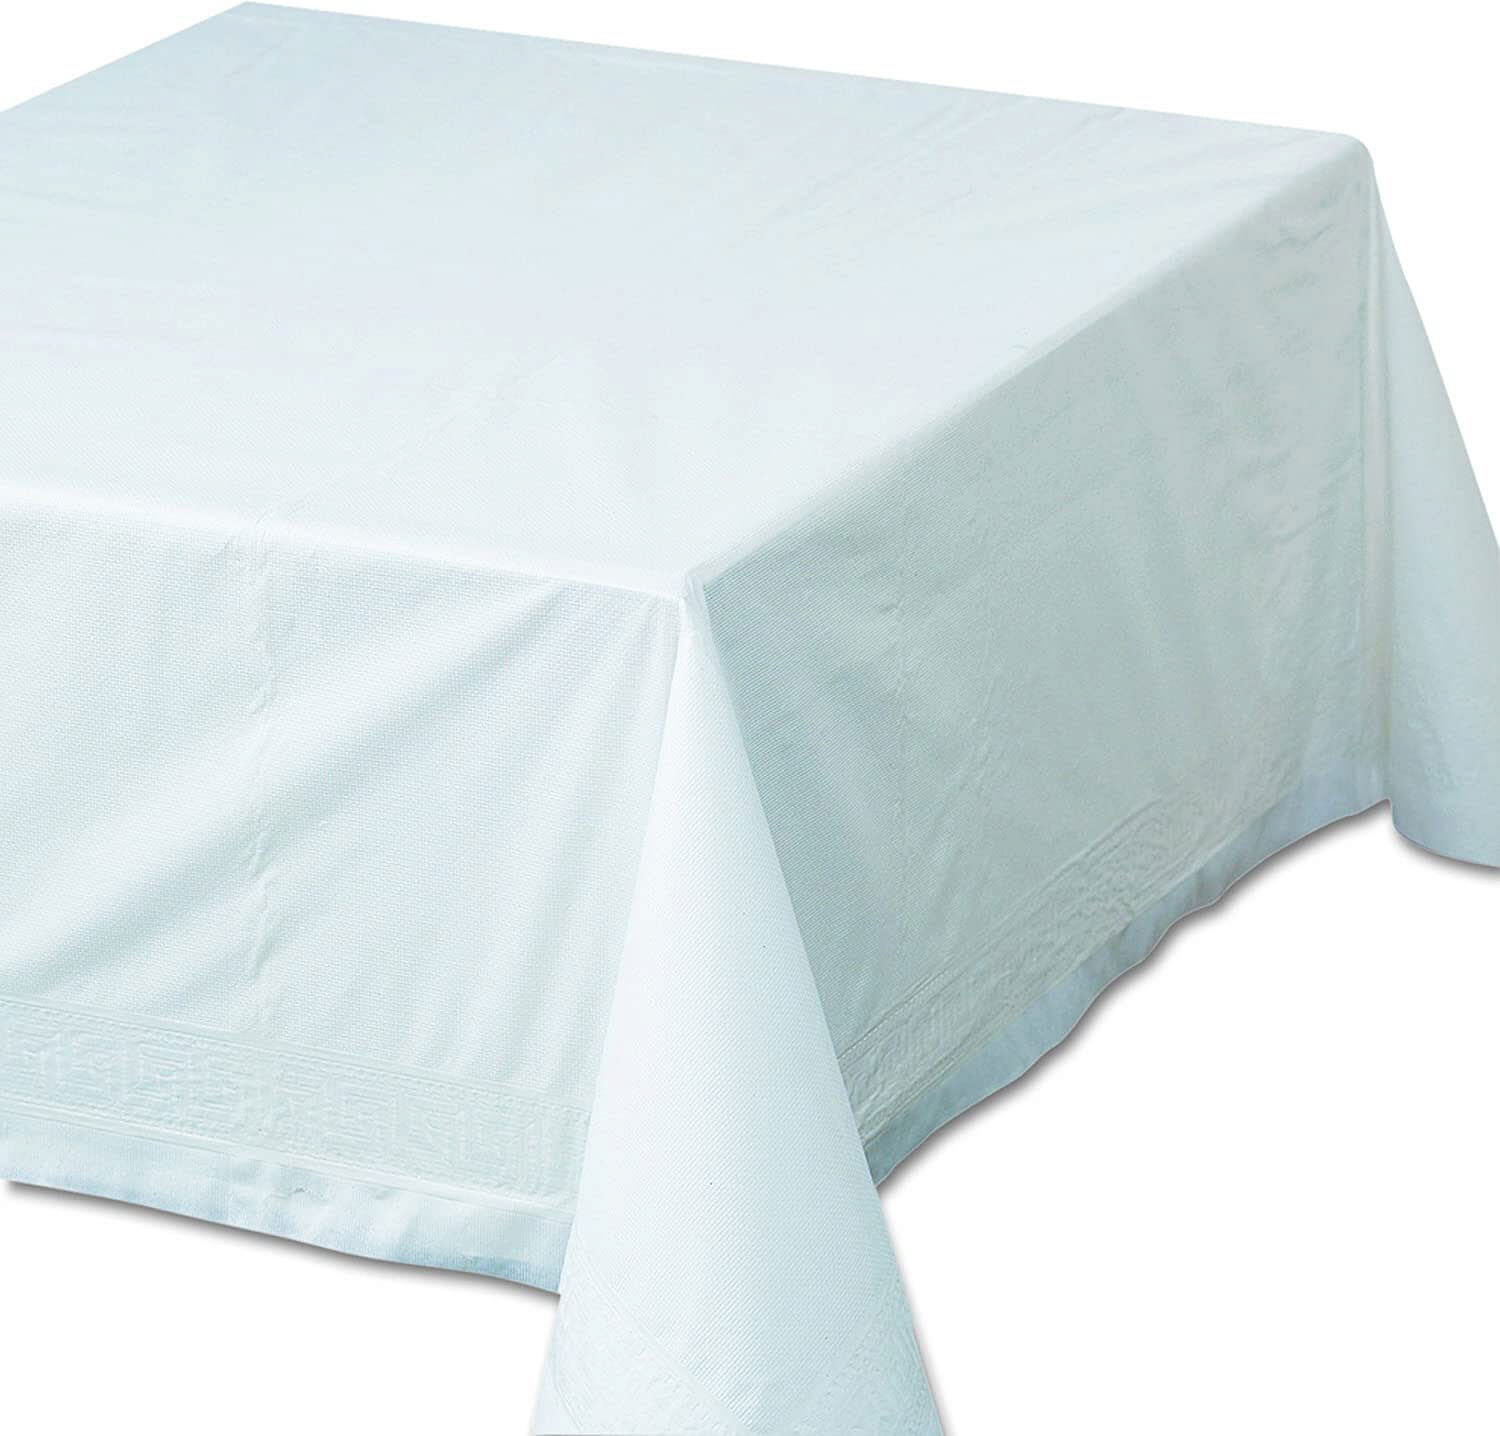 Hoffmaster 114000 40 x 300' White Plastic Table Cover Roll